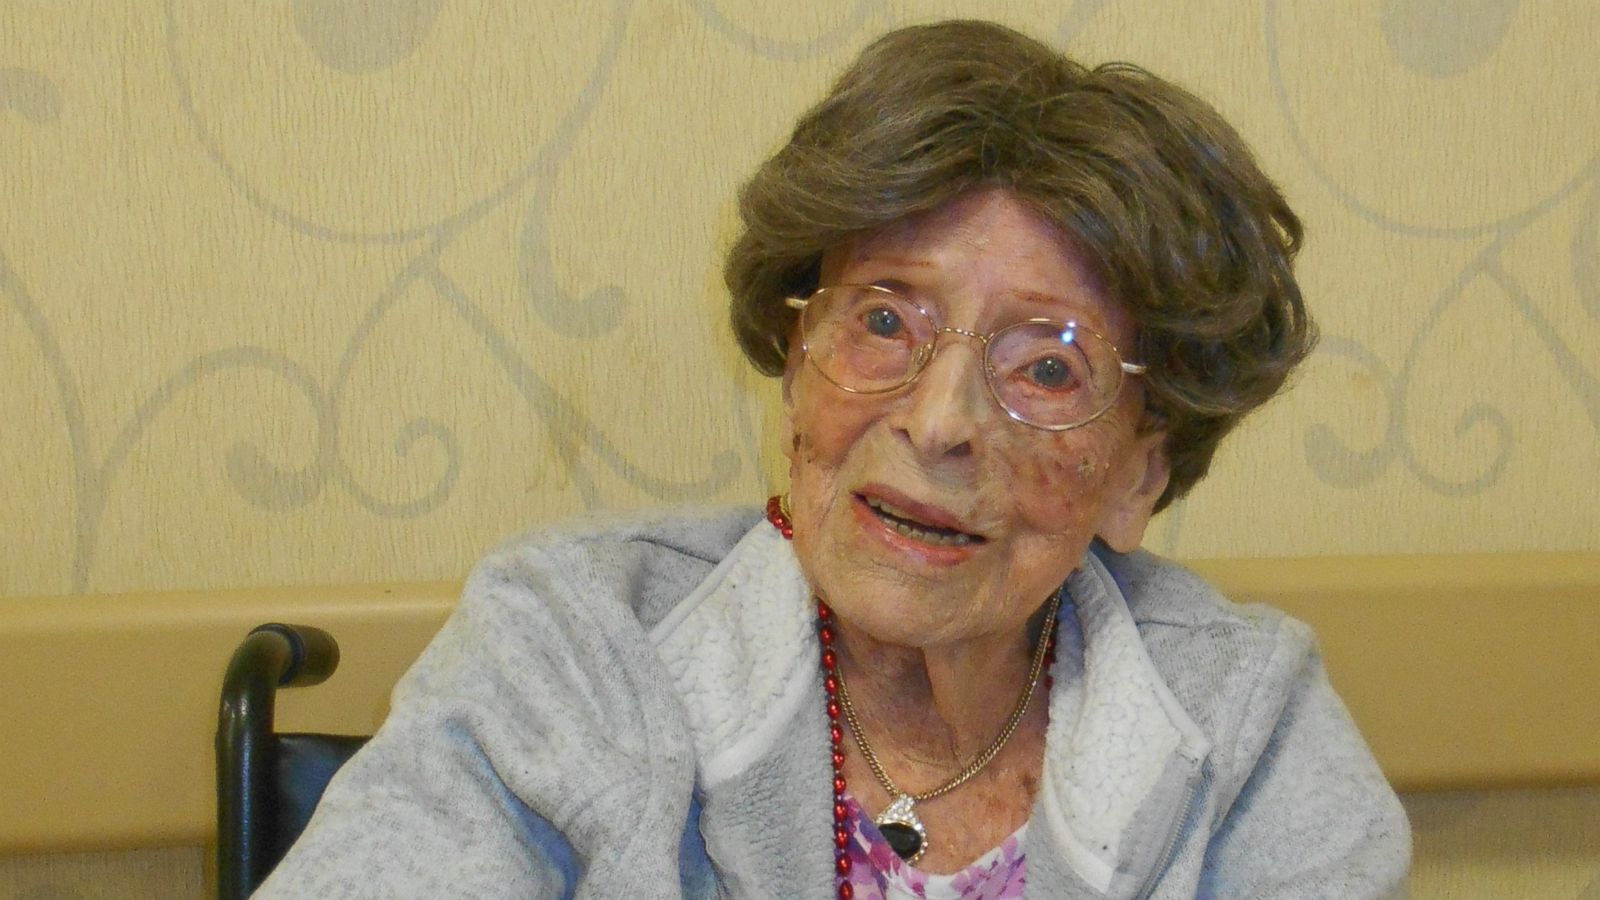 See Photos Of An 83 Year Old Woman Who Is The World Oldest Super